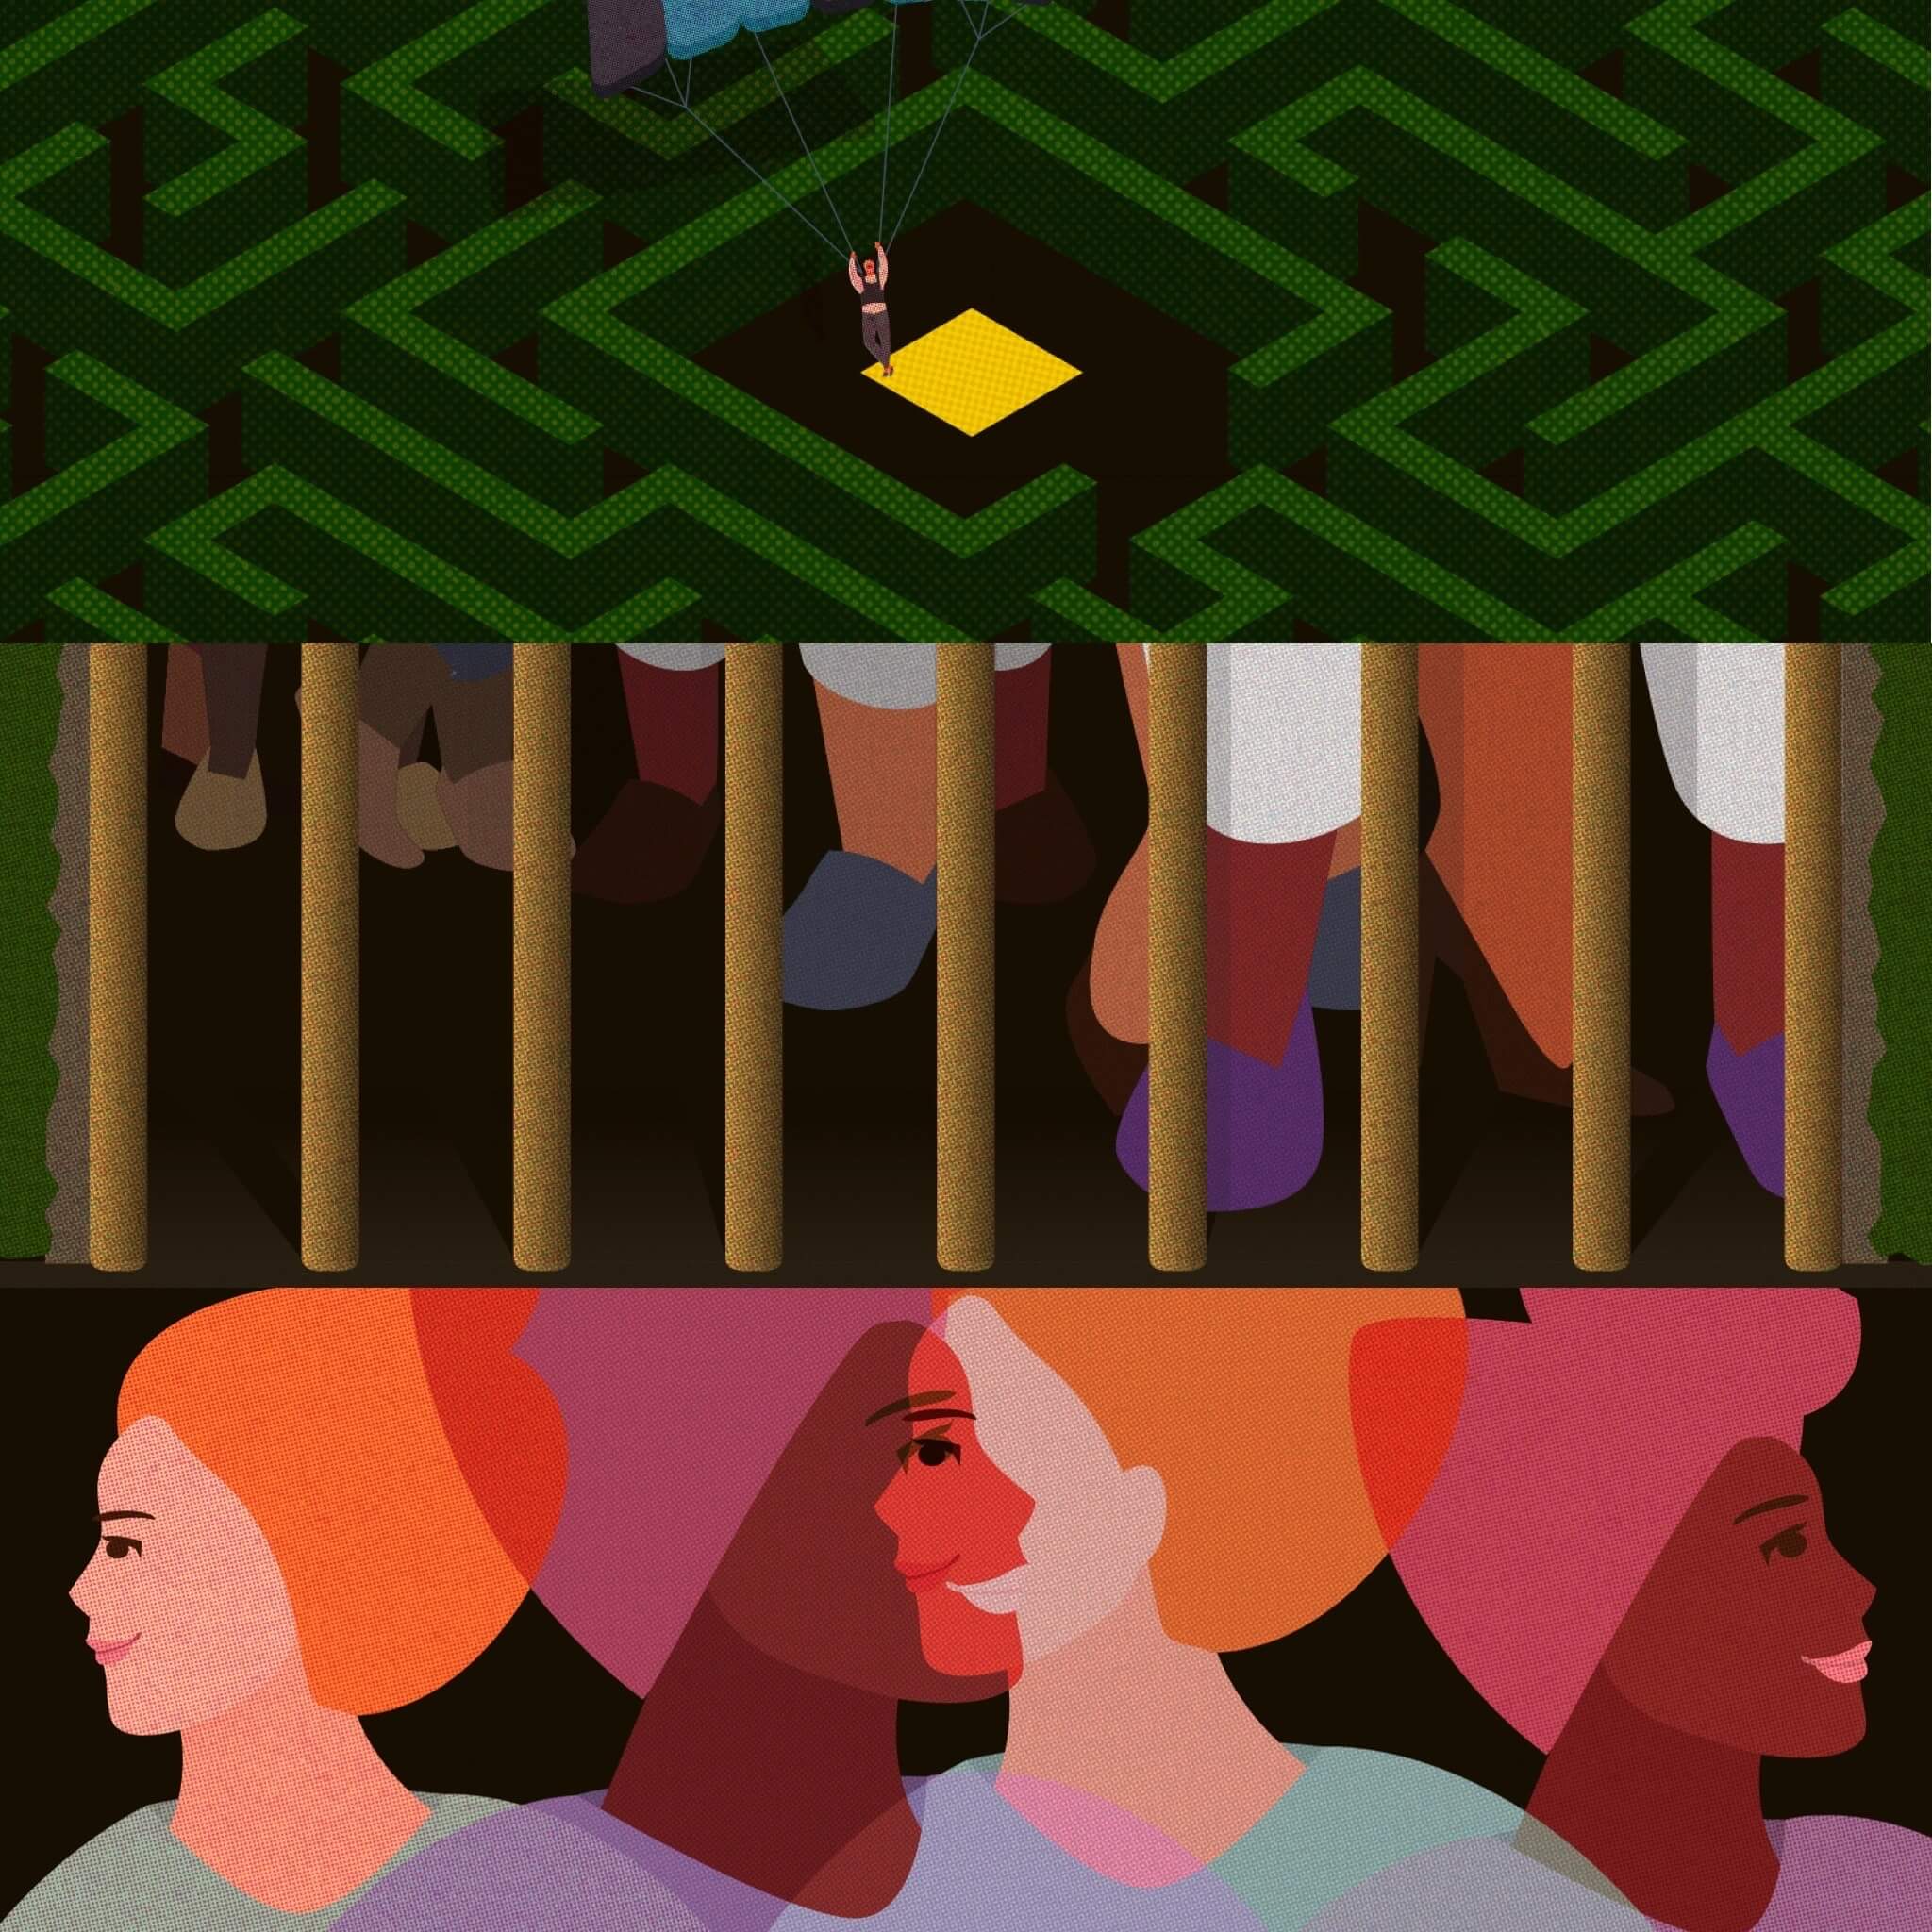 Three illustrations created for an article on wealth and race inequties